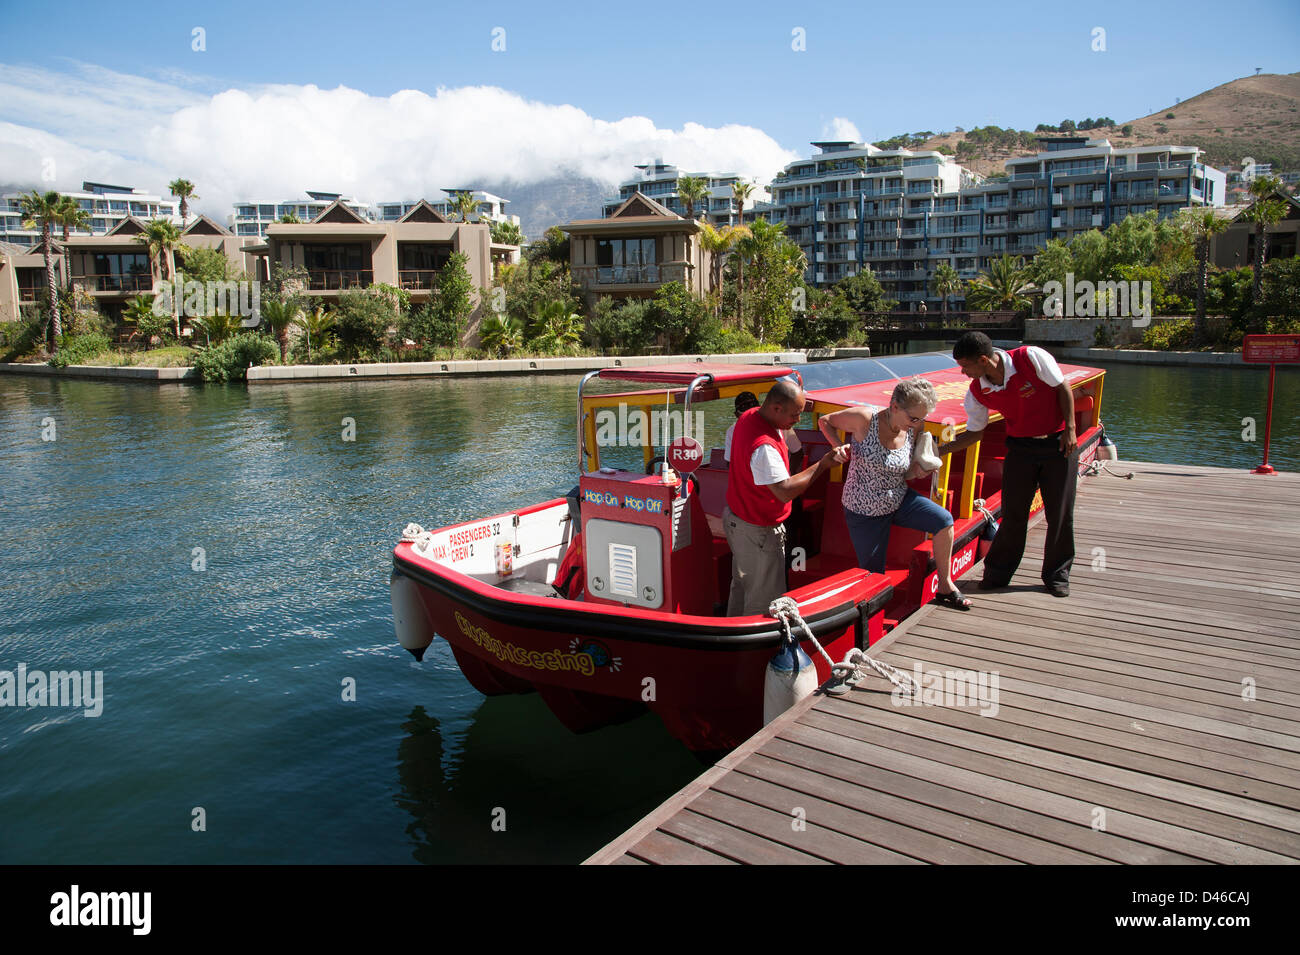 Canal cruise boat at the V&A Waterfront Cape Town South Africa passenger boat Stock Photo